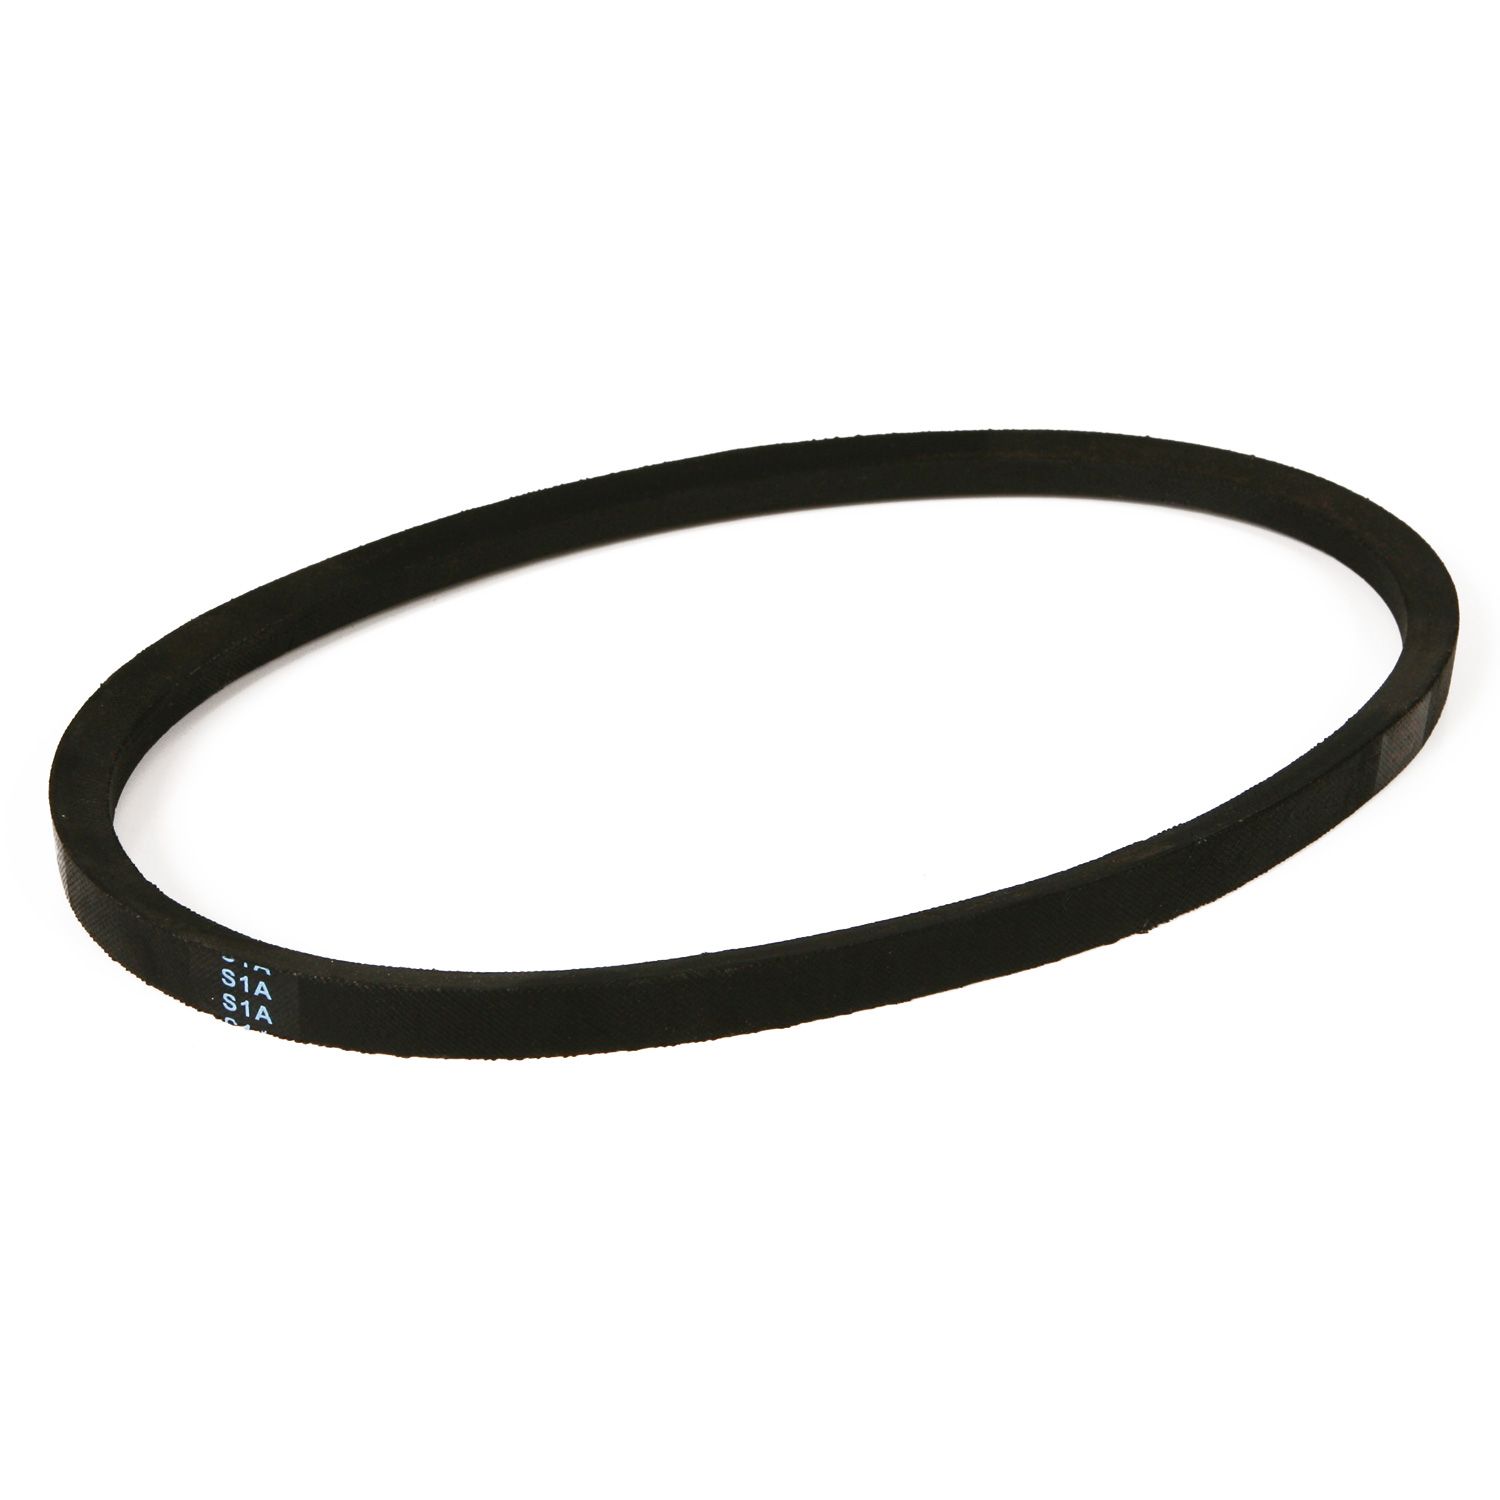 1/2 Top Width 11/32 Thick 1/2 Top Width 11/32 Thick Anti-Static Jason Industrial A20 V-Belt A Section 